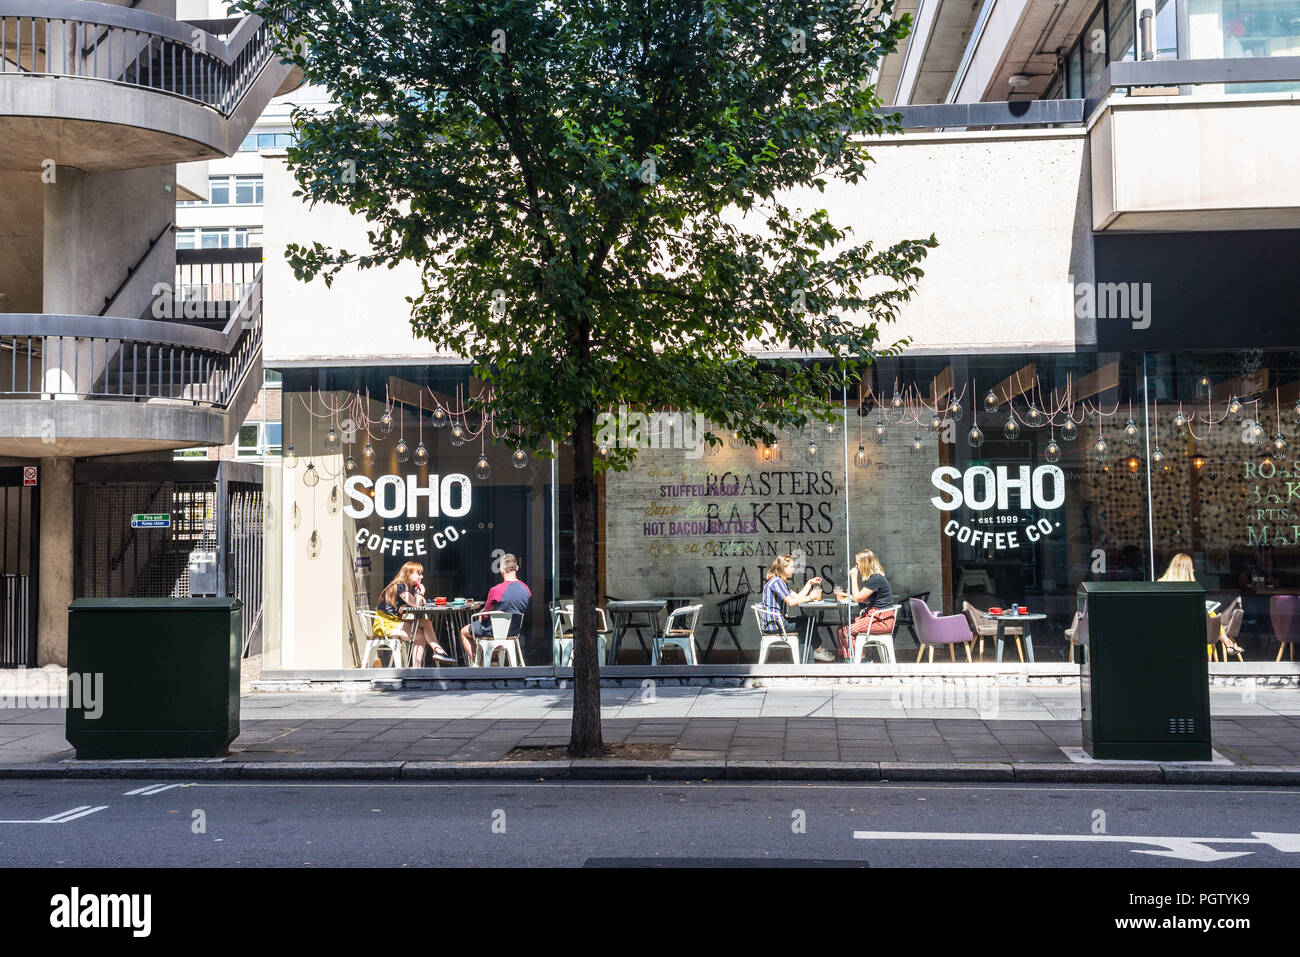 SOHO Coffee Co. branch in Baker Street, an independent artisan coffee chain in Marylebone, London, UK Stock Photo